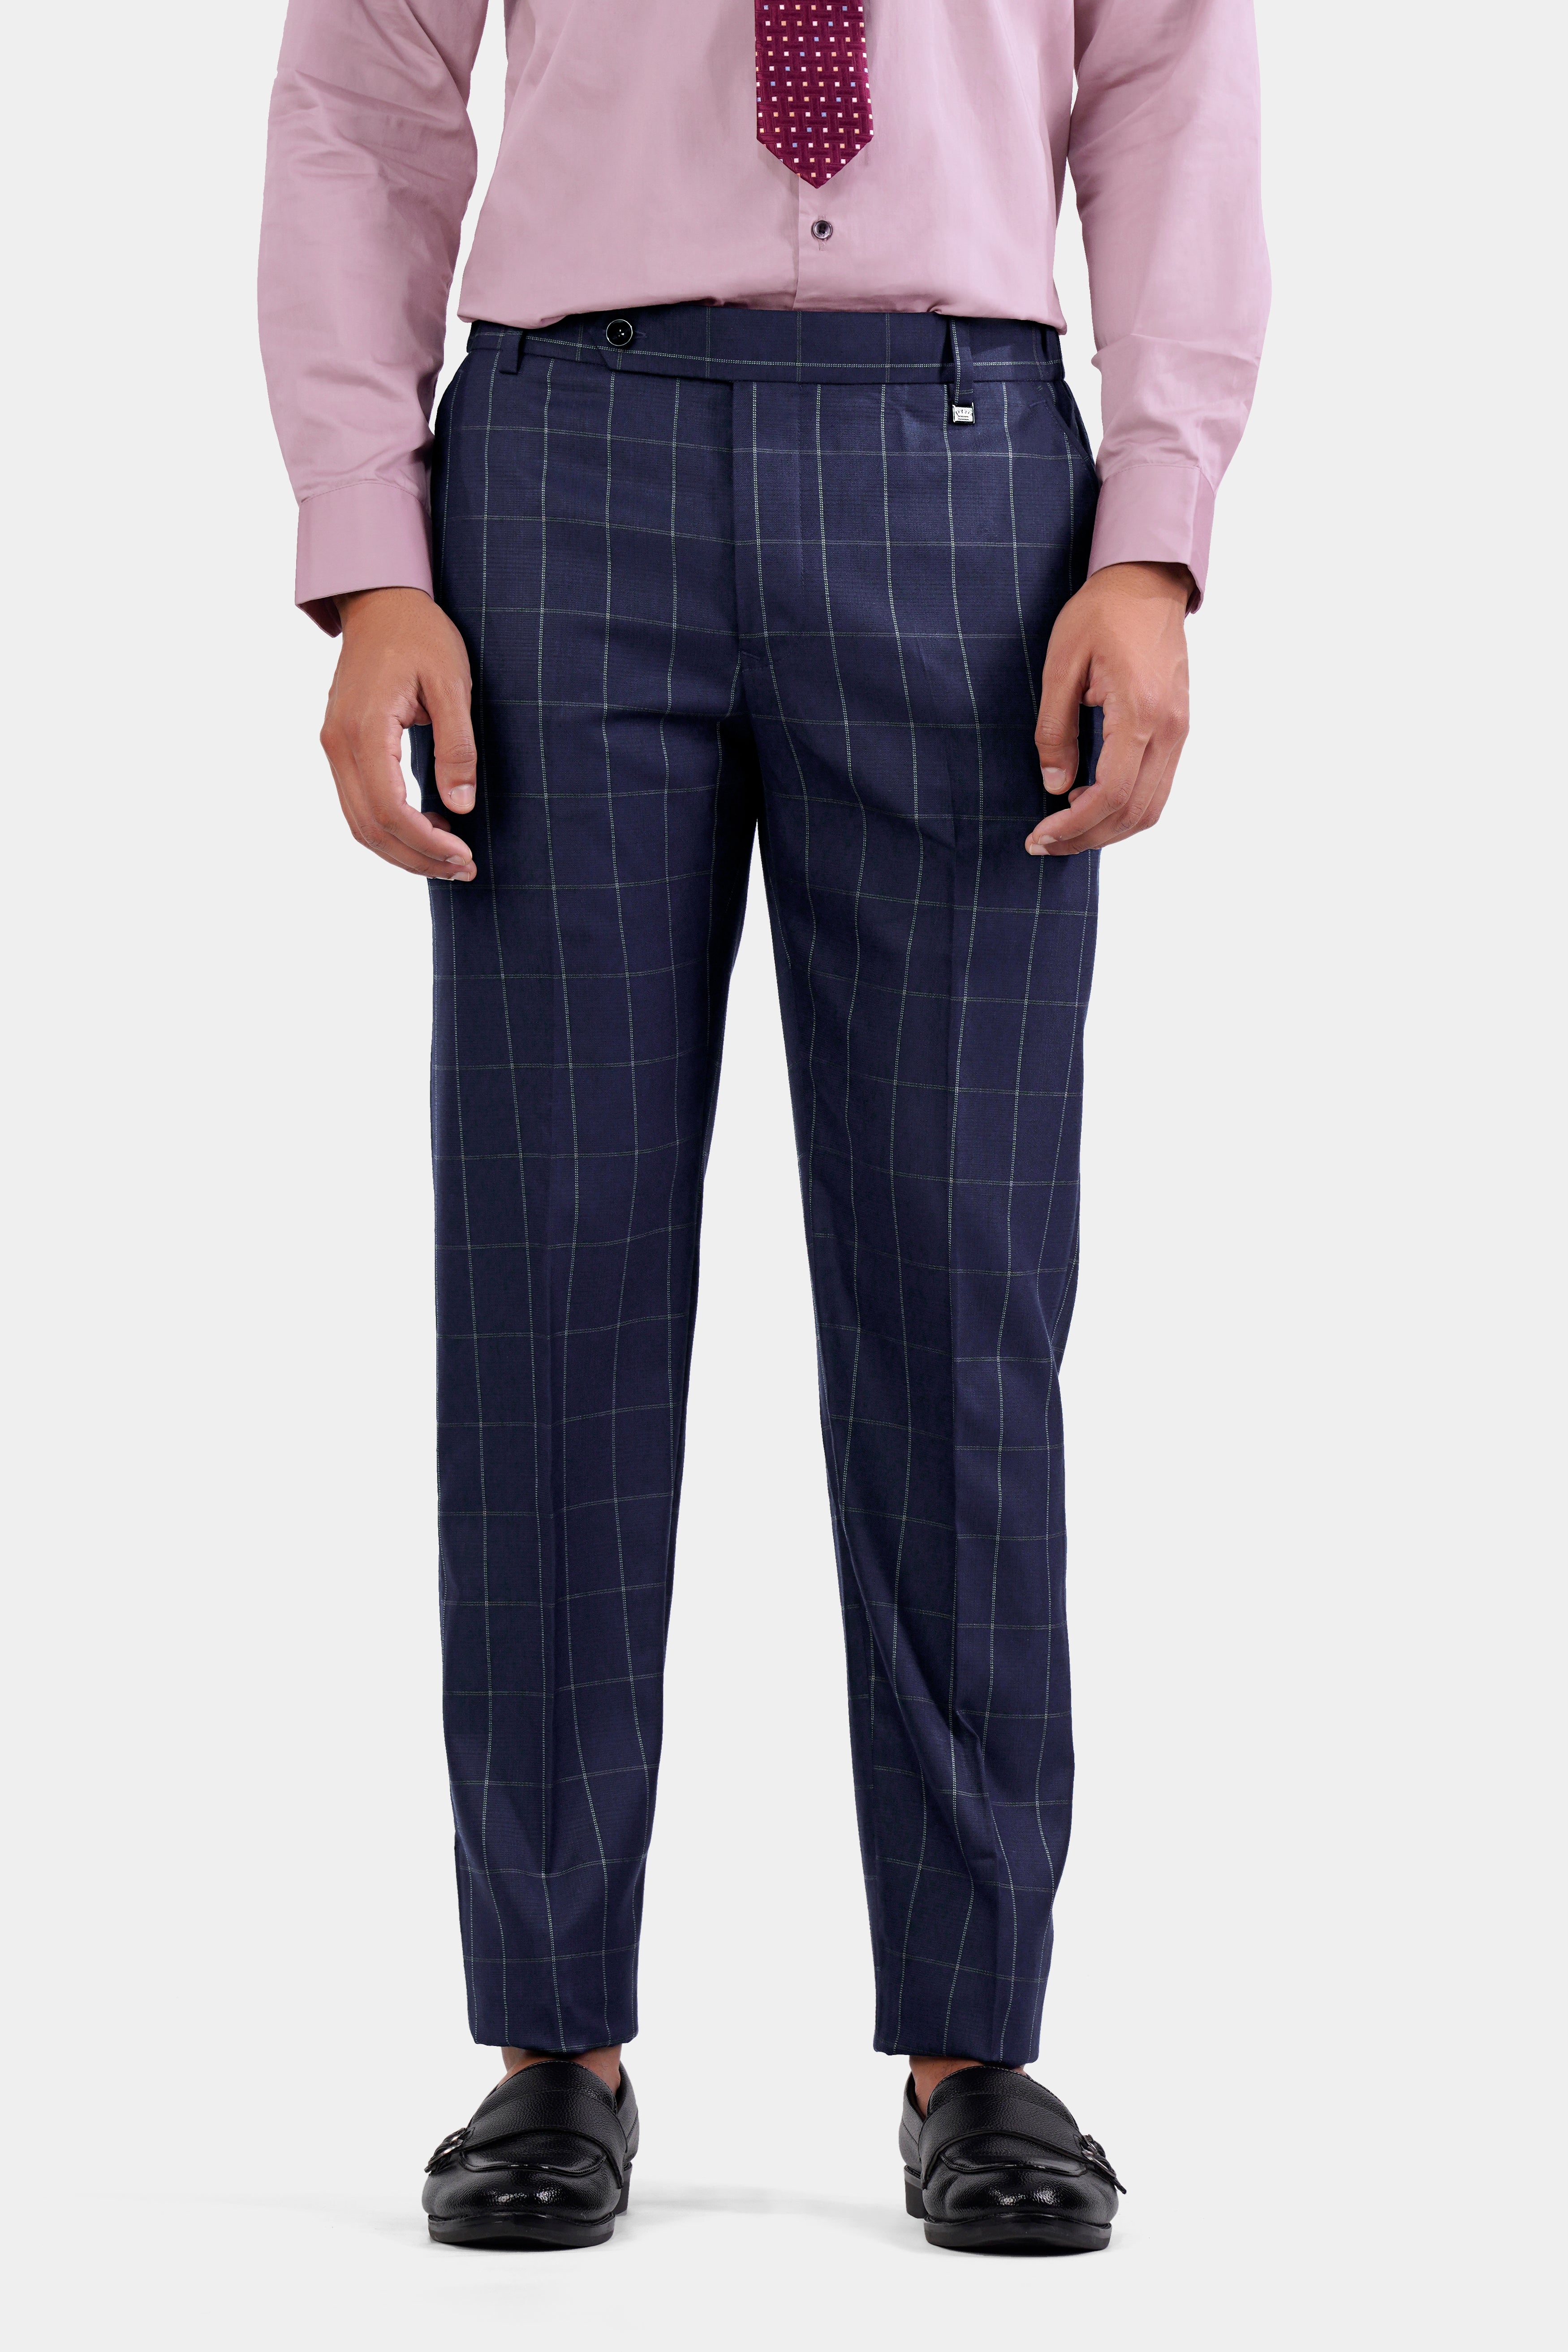 ASOS DESIGN super skinny suit trousers in large scale navy windowpane check  | ASOS